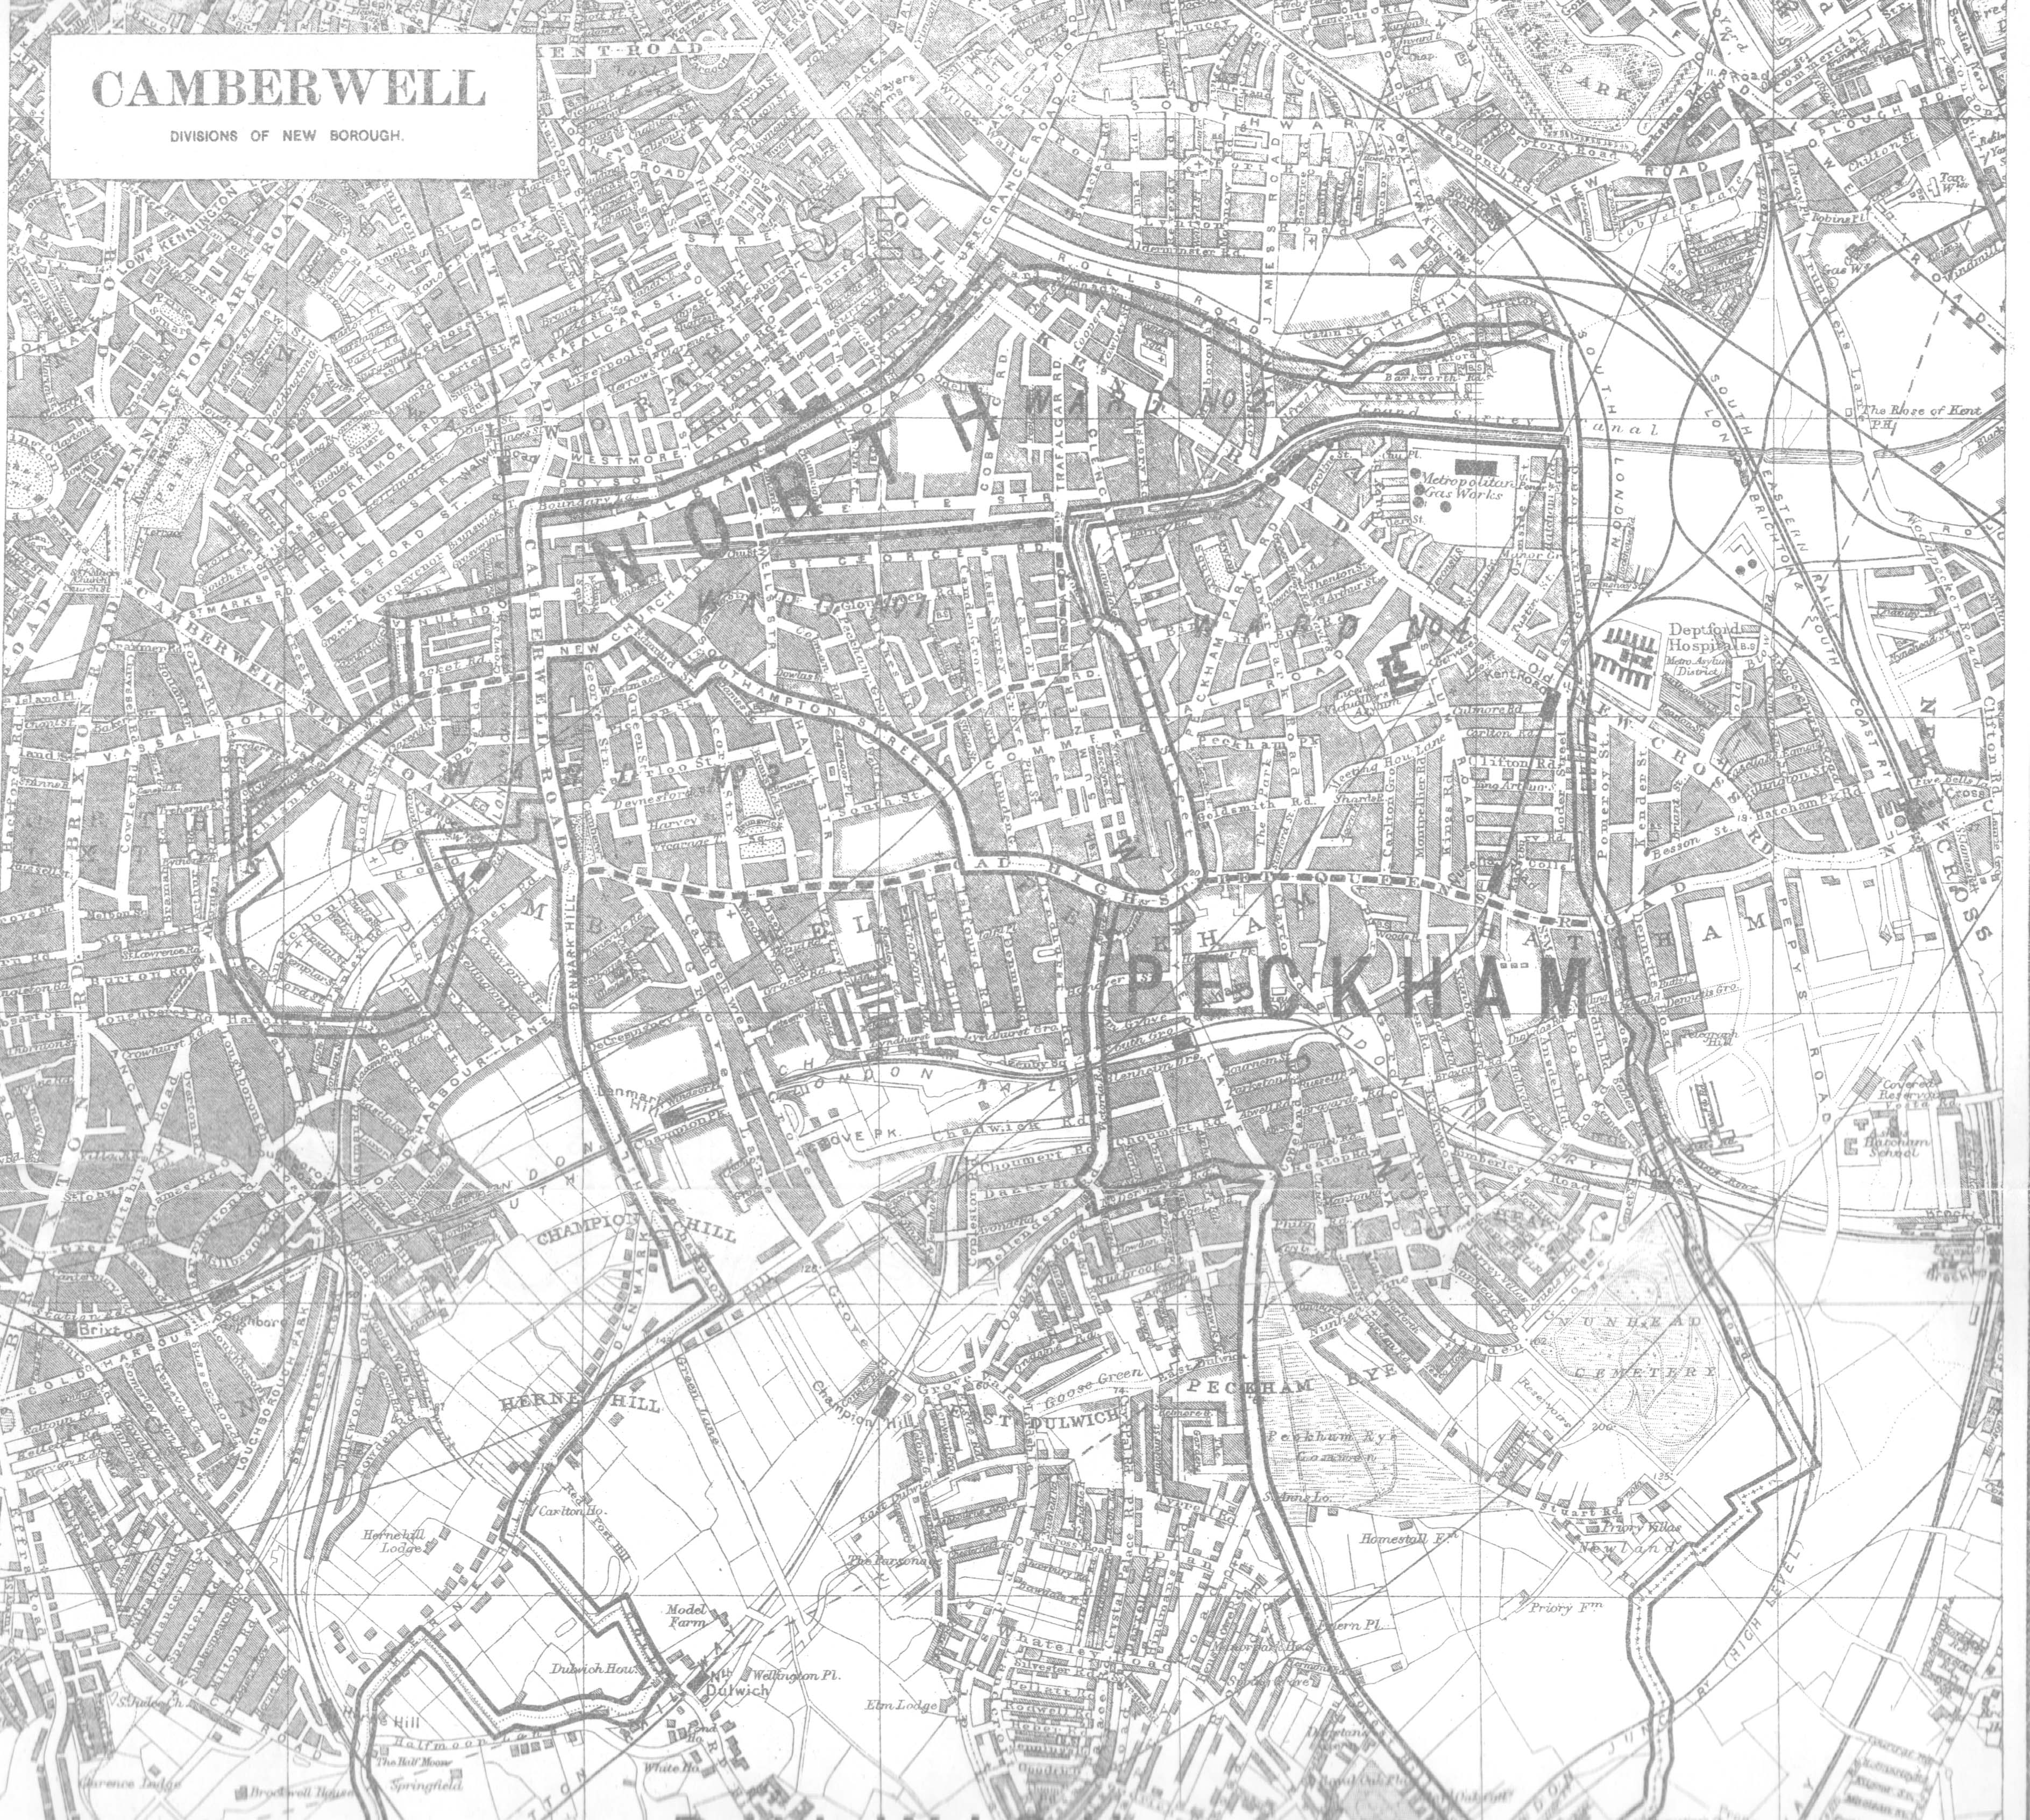 Map of the Borough of Camberwell